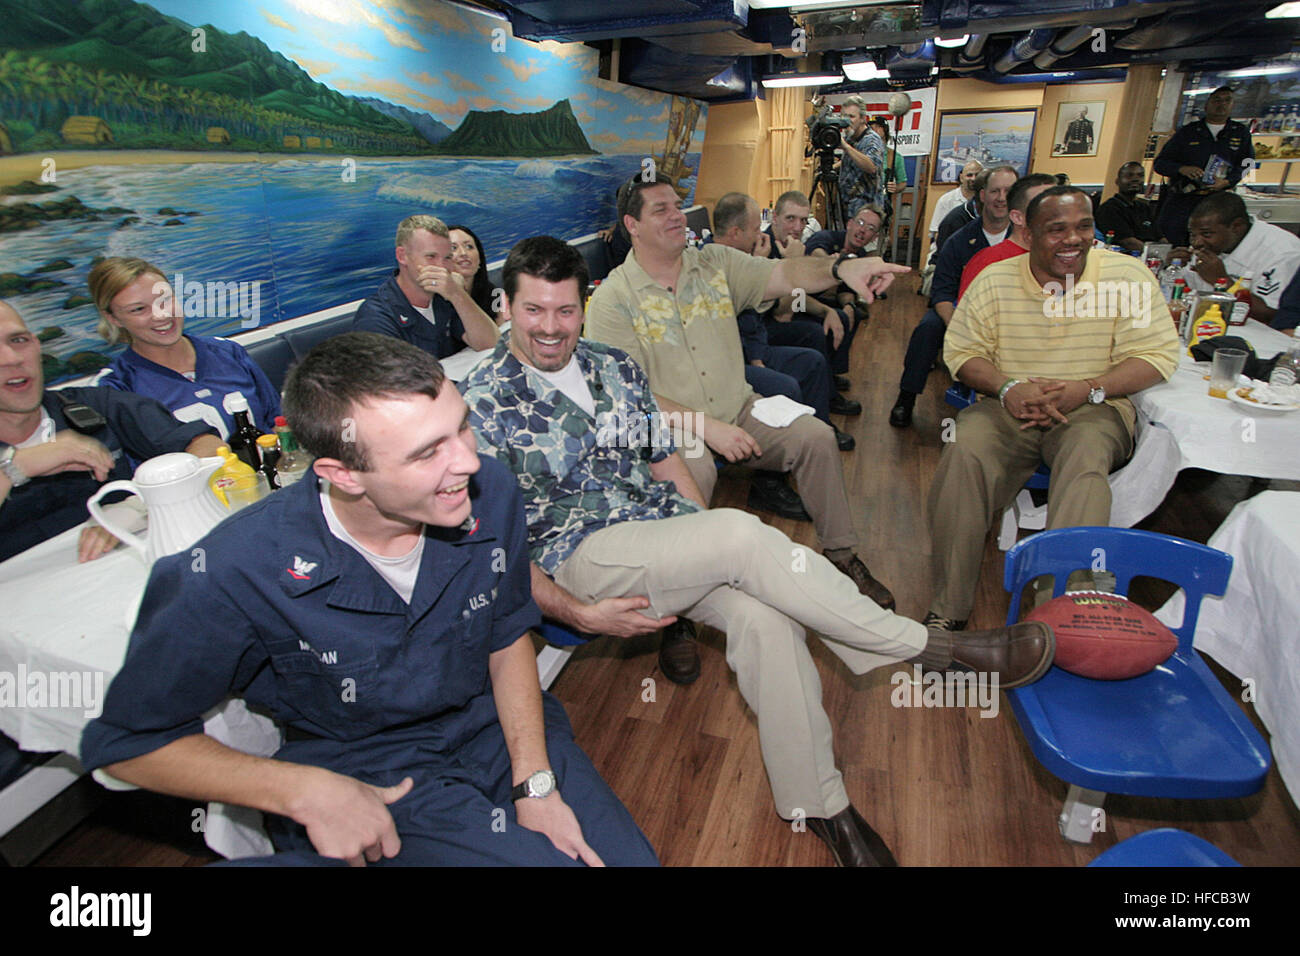 050206-N-3228G-020 Pearl Harbor, Hawaii (Feb. 6, 2005) - ESPN commentators and former National Football League (NFL) players Mike Golic and Mark Schlereth and Green Bay Packer fullback William Henderson and Sailors watch the 2005 Super Bowl in the galley aboard USS Russell (DDG 59). Golic, Schlereth and Henderson were invited for a visit aboard Russell to watch the Super Bowl with the shipÕs crew, have lunch and tour the ship. U.S. Navy photo by PhotographerÕs Mate 1st Class William R. Goodwin (RELEASED) Mark Schlereth and William Henderson and Mike Golic Stock Photo